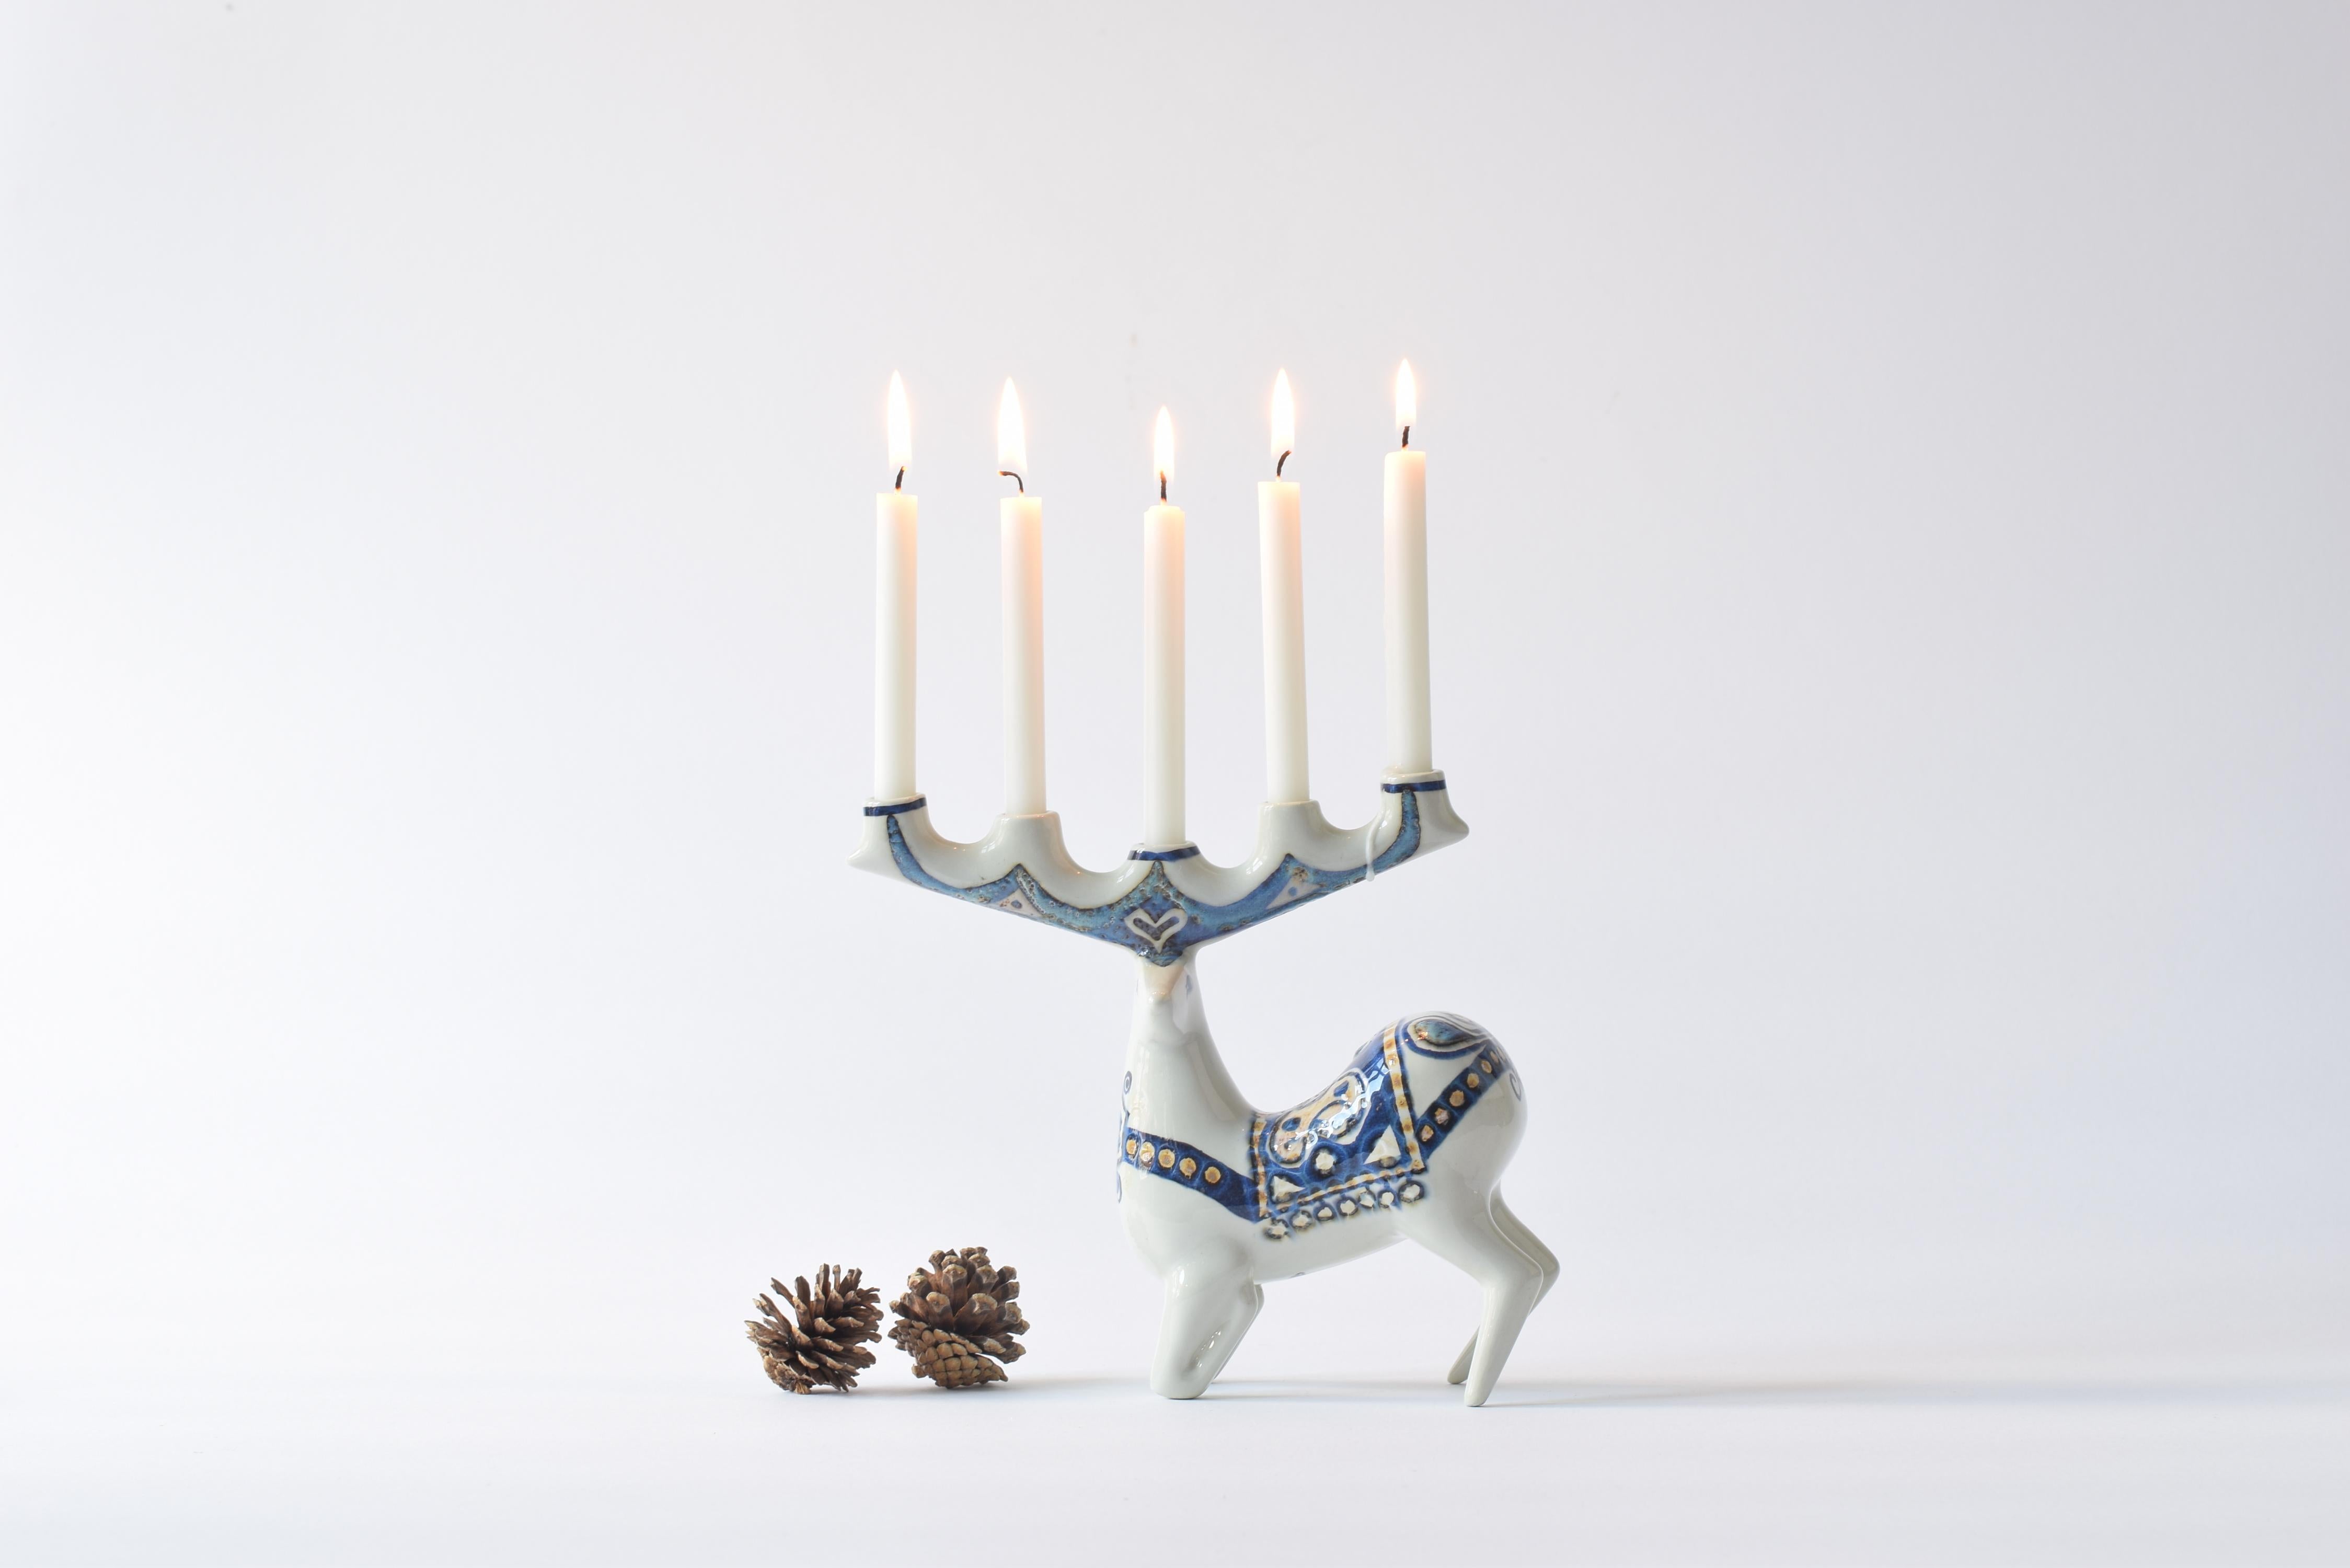 Rare deer figurine candelabra by Jeanne Grut (1927-2009) for Royal Copenhagen. Designed in 1969 and manufactured in the 1970s.
The candelabra is for five small slim candles. 

The candelabra has a handpainted decor which includes abstract flowers